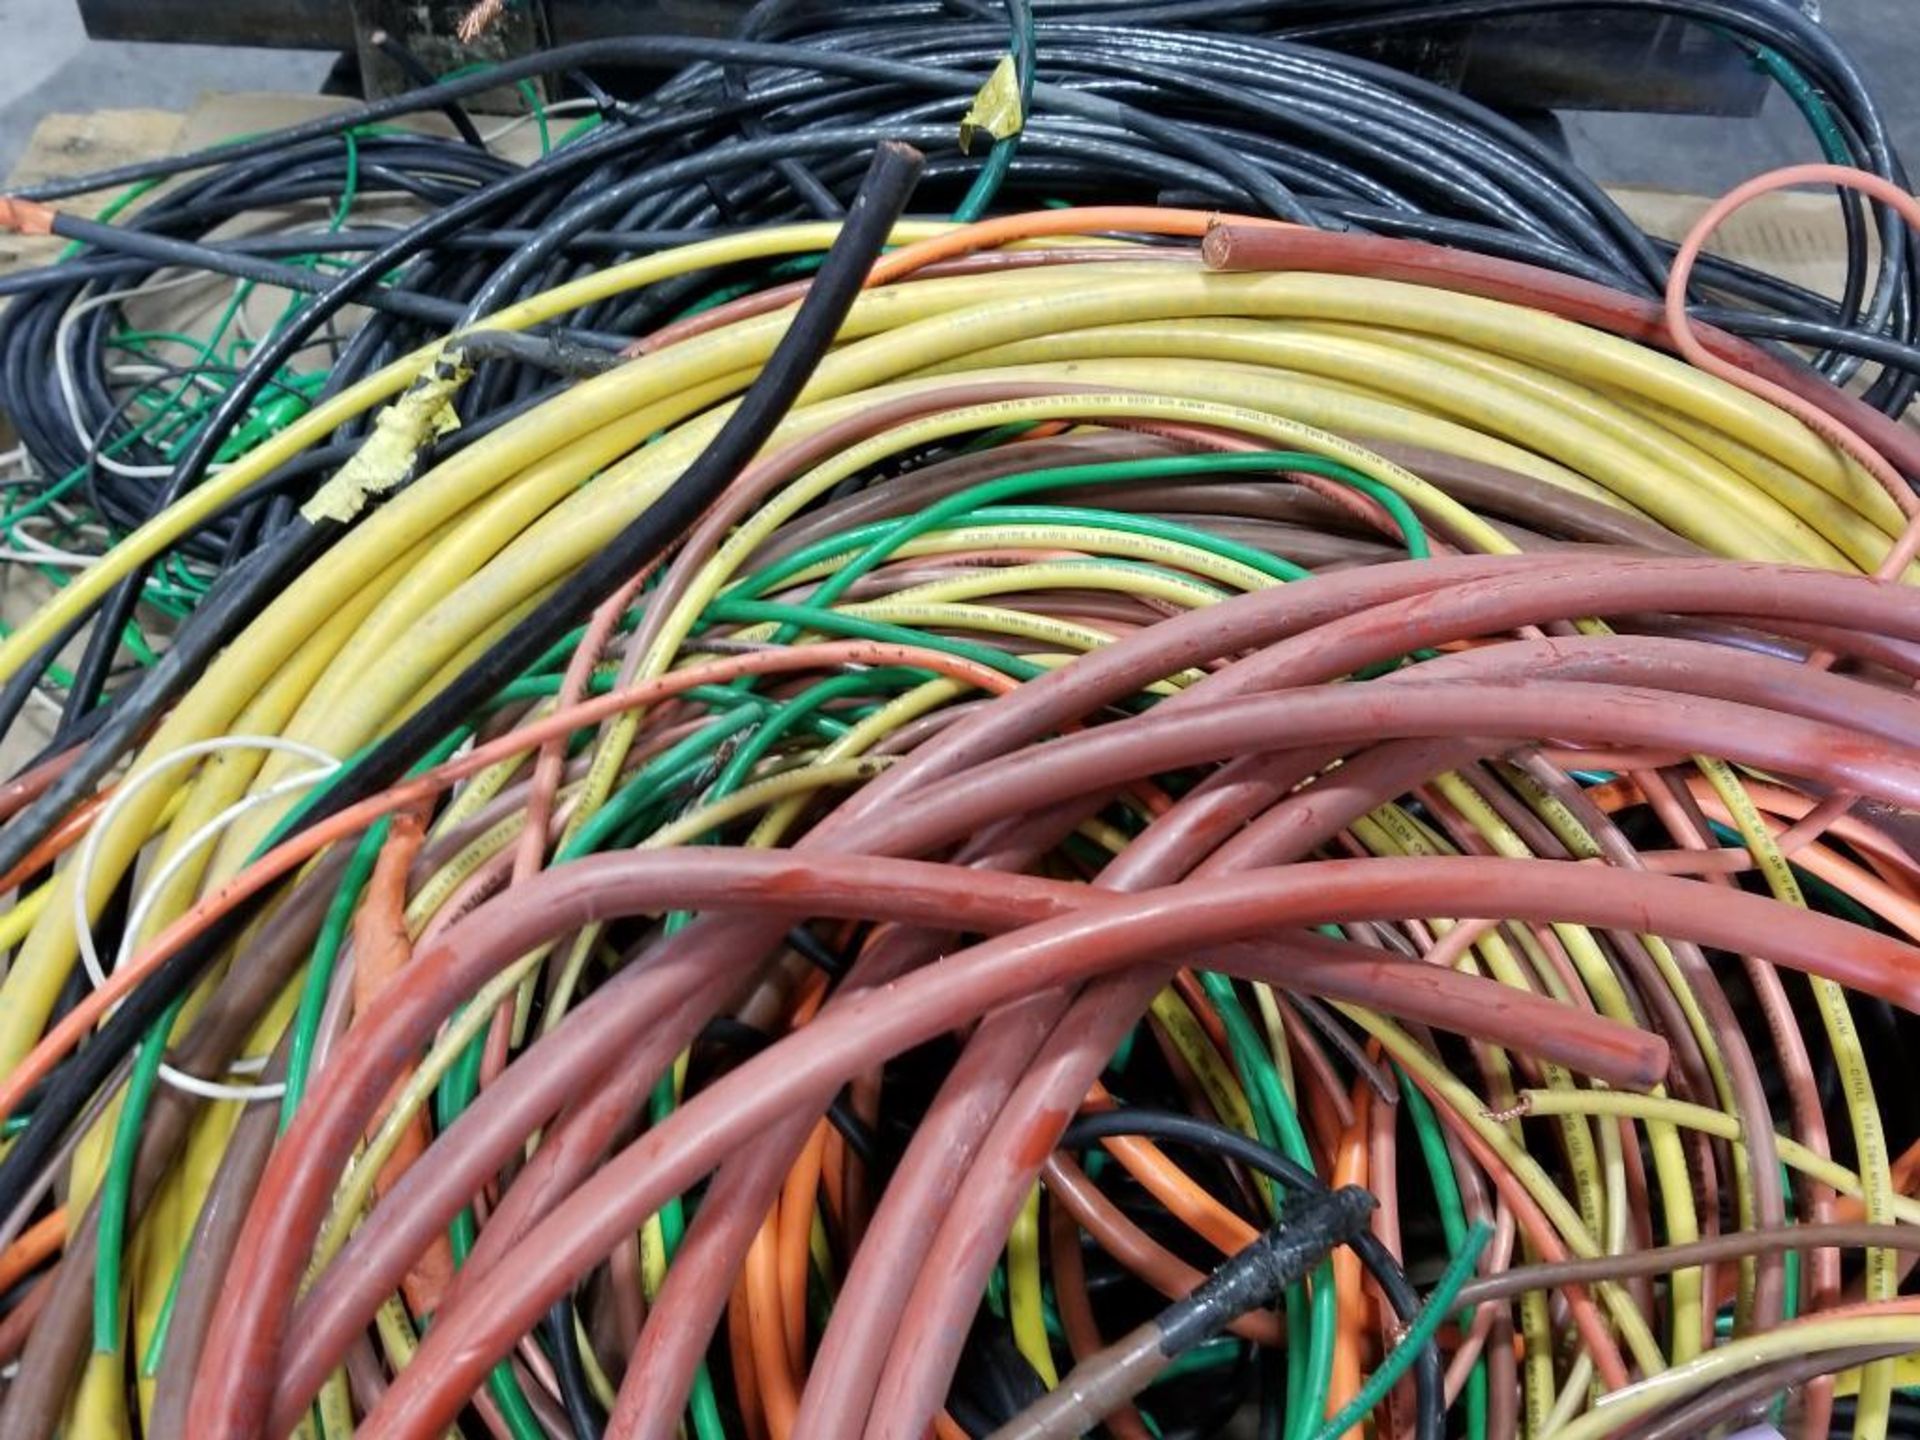 Pallet of assorted electrical wiring. - Image 7 of 9